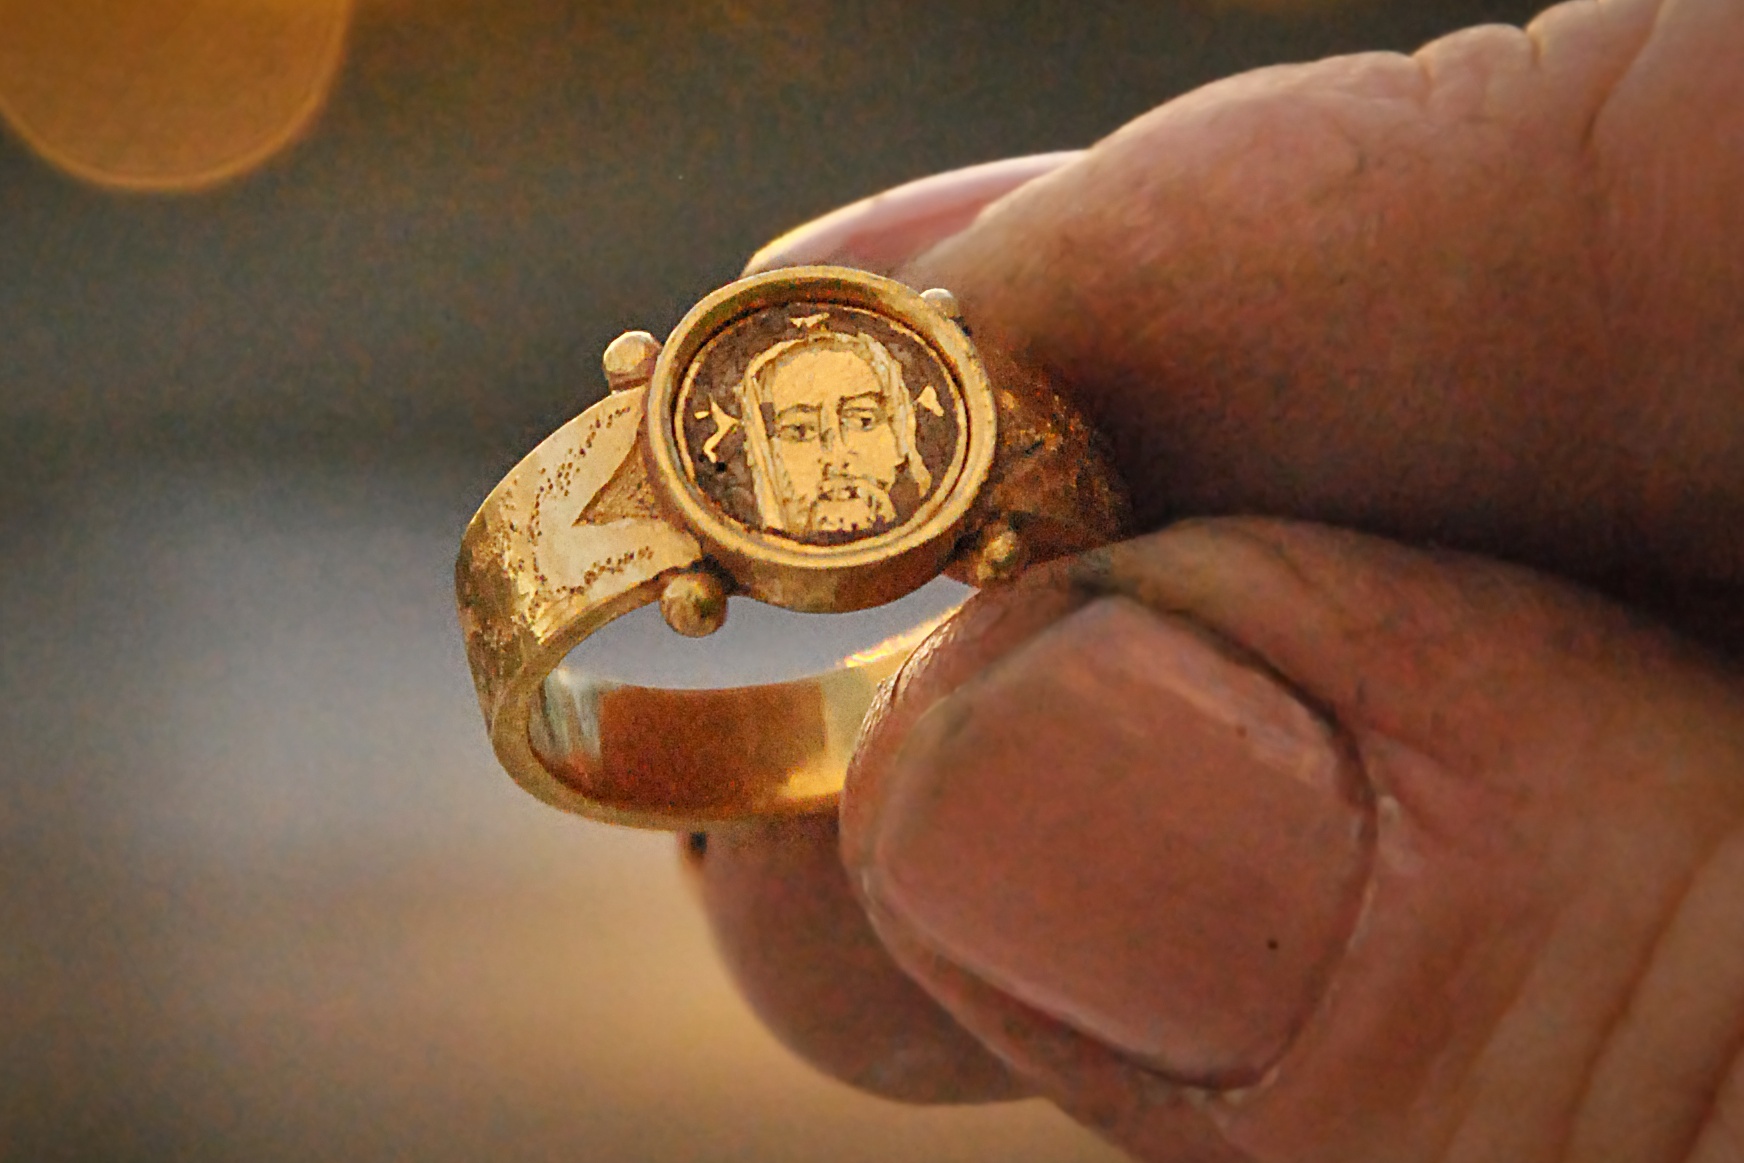 Spectacular' Gold Ring With Christ Image Among 30,000 Archaeological Finds  - Newsweek